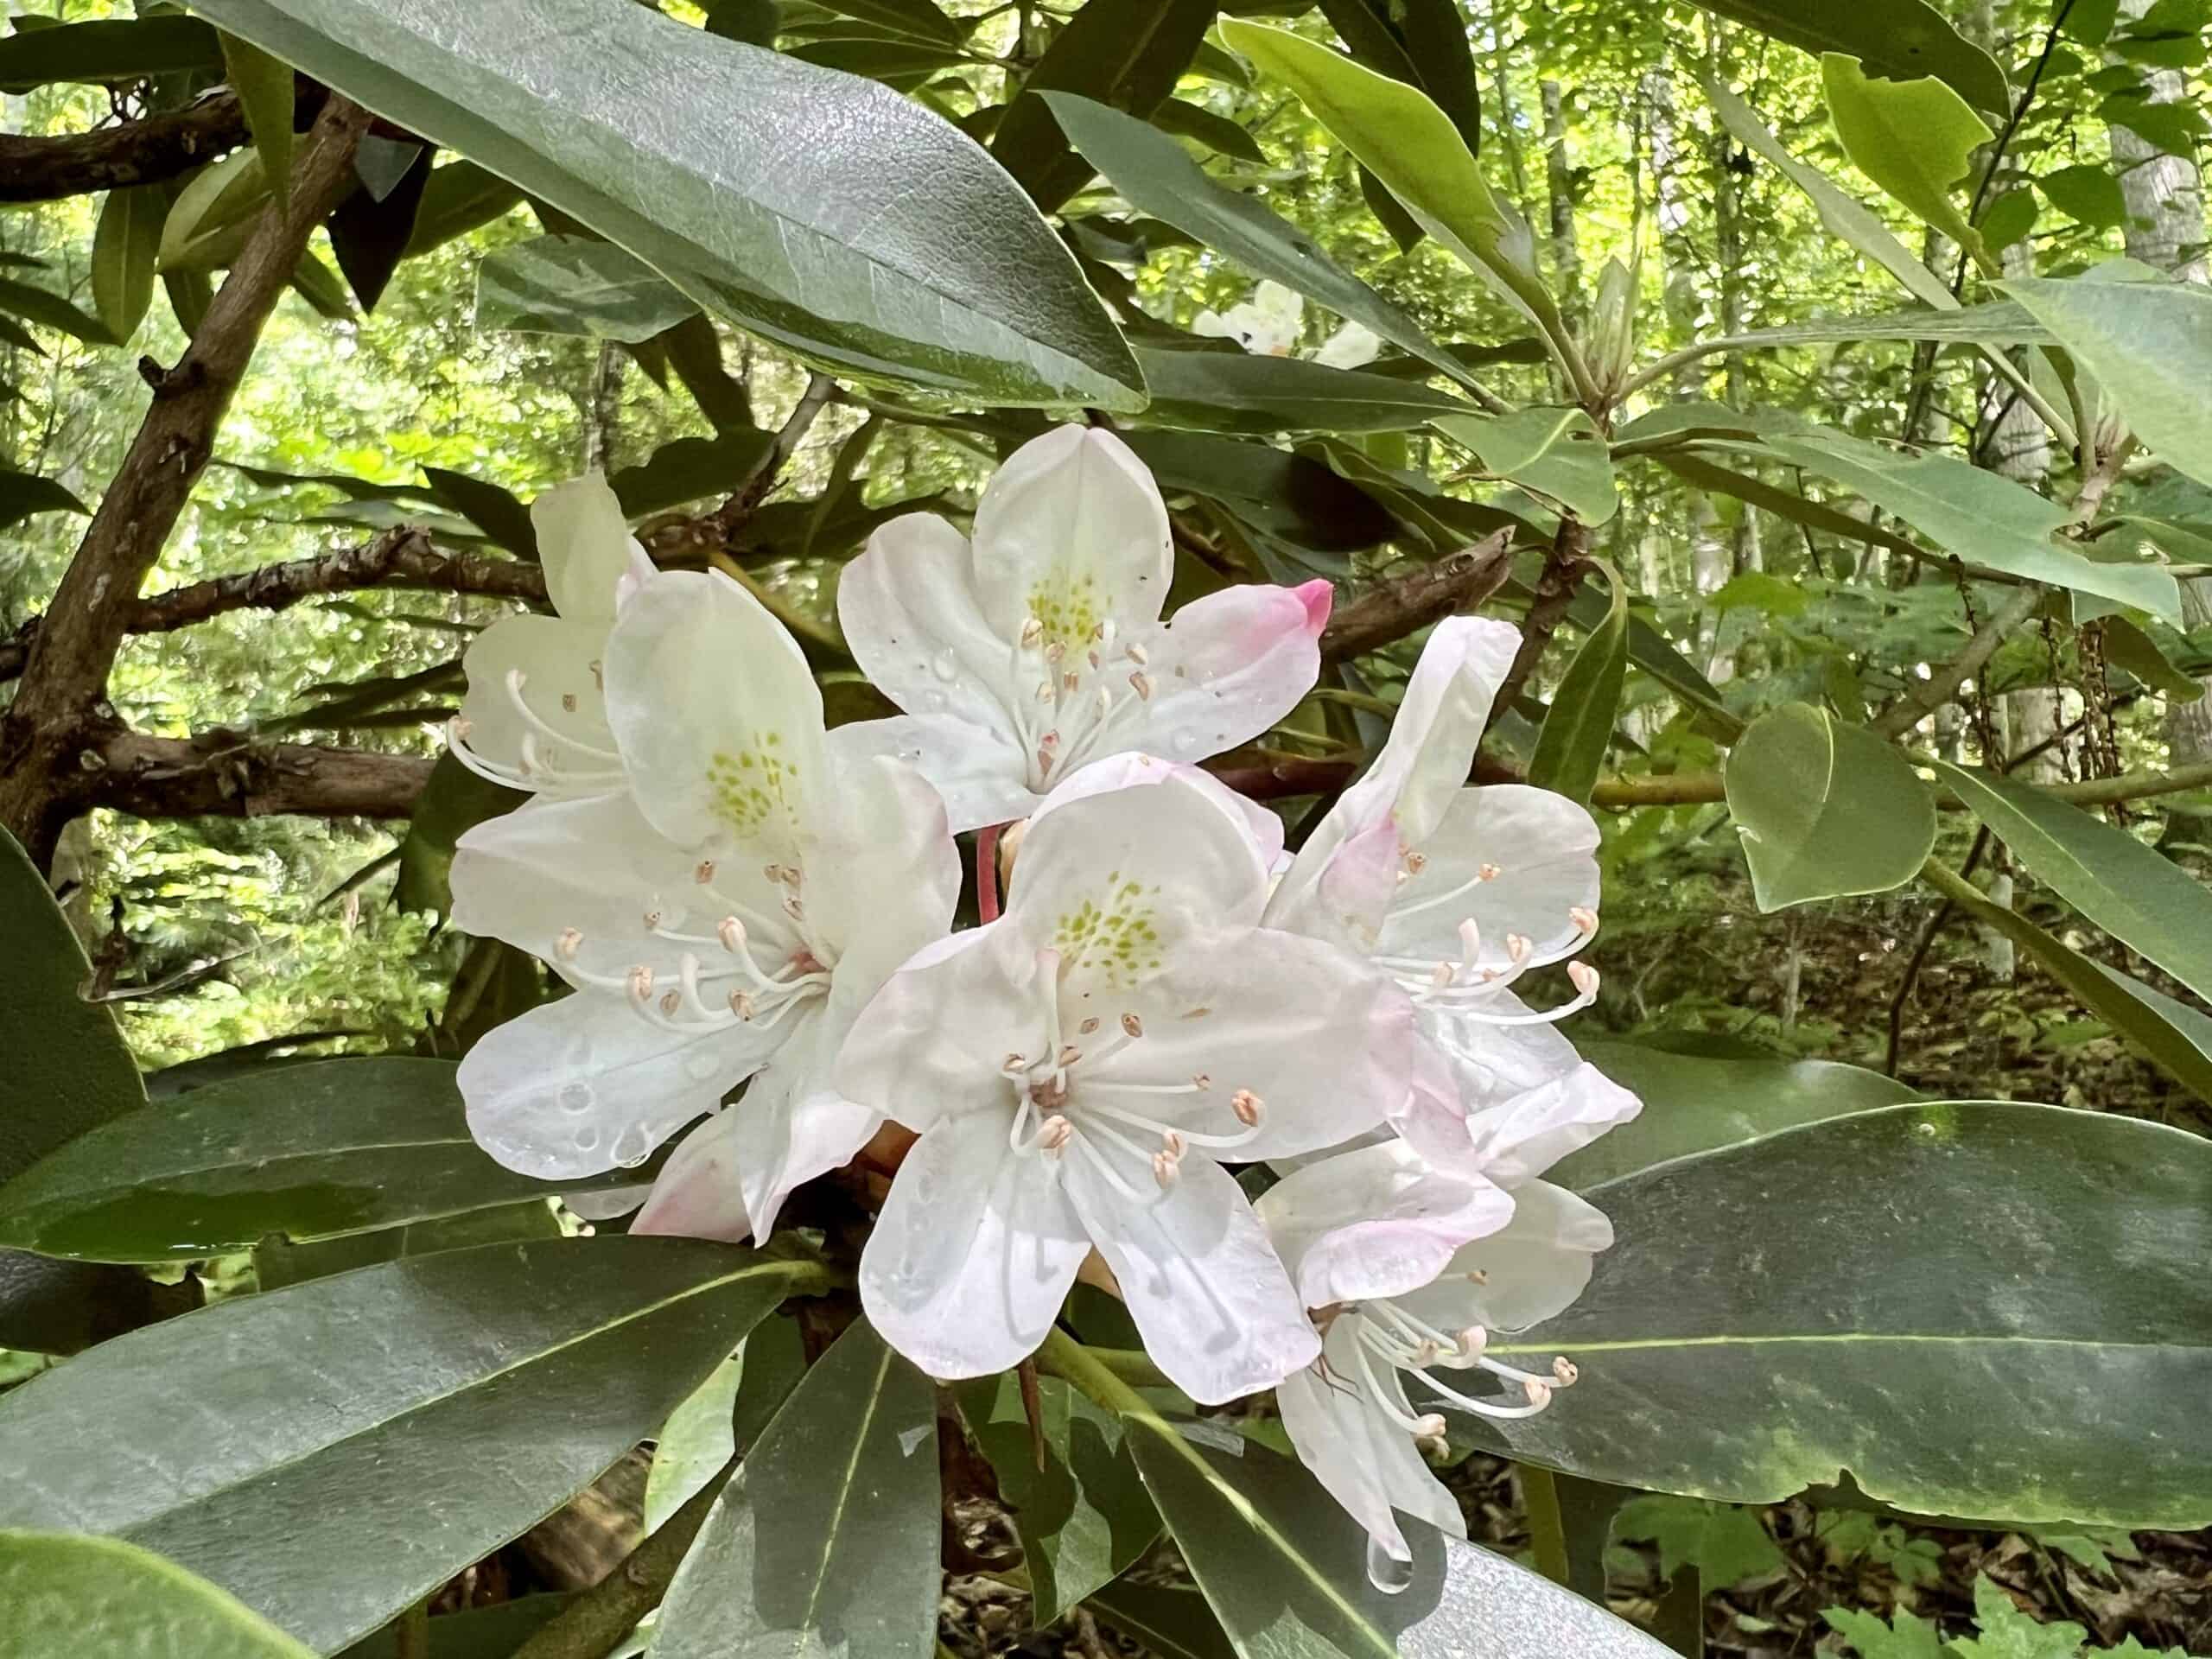 rhododendron-bloom-the-cove